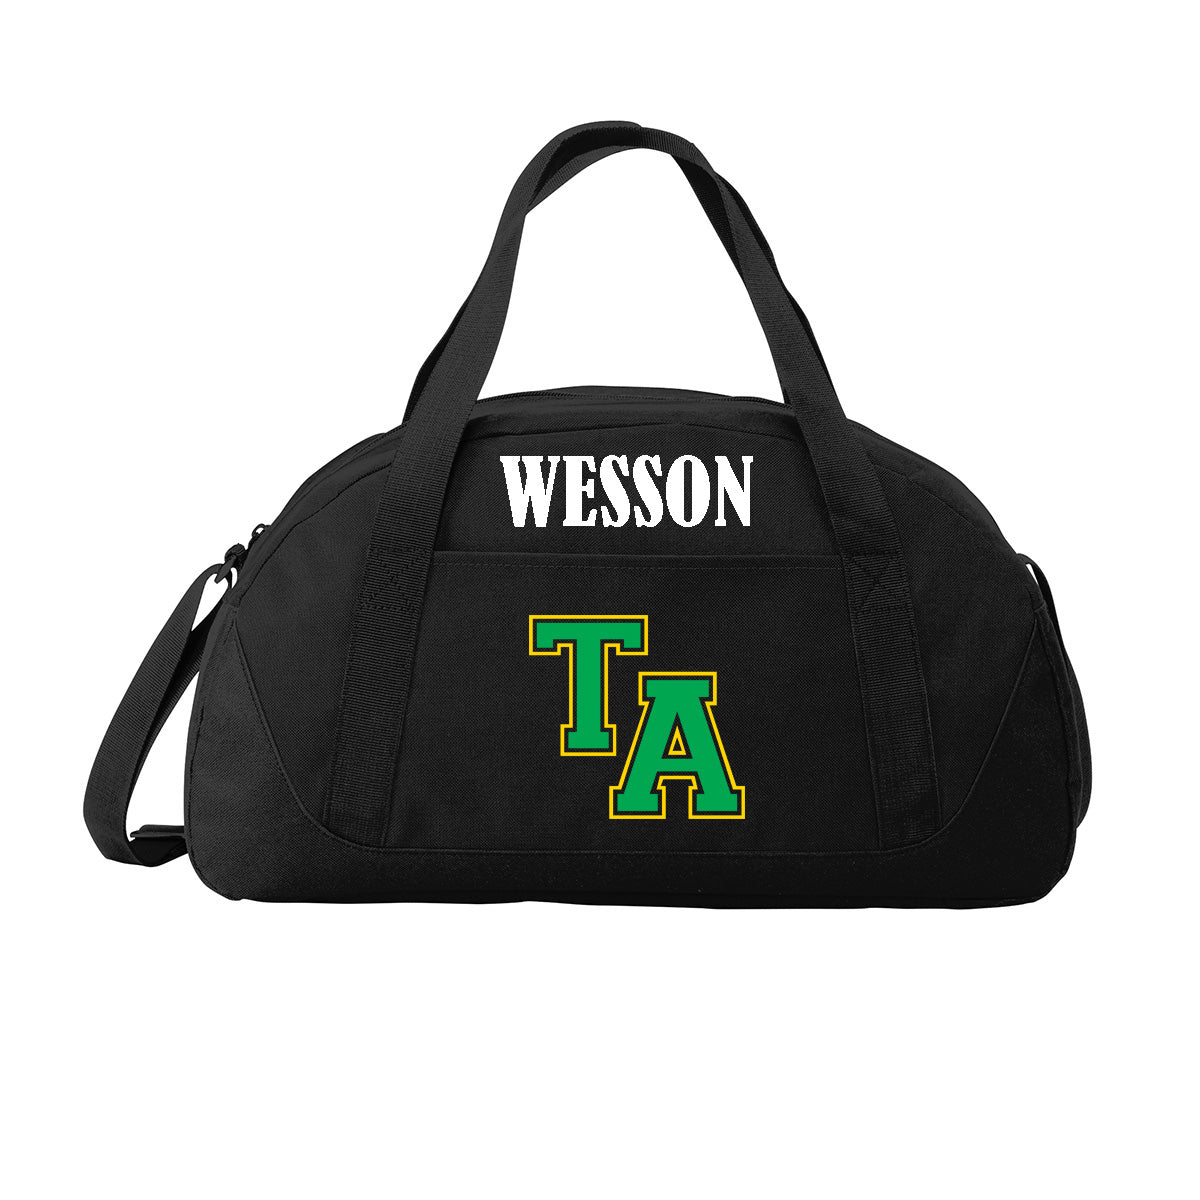 Twiggs Academy - Small Dome Duffle Bag with TA (varsity font) - Black (BG818) - Southern Grace Creations